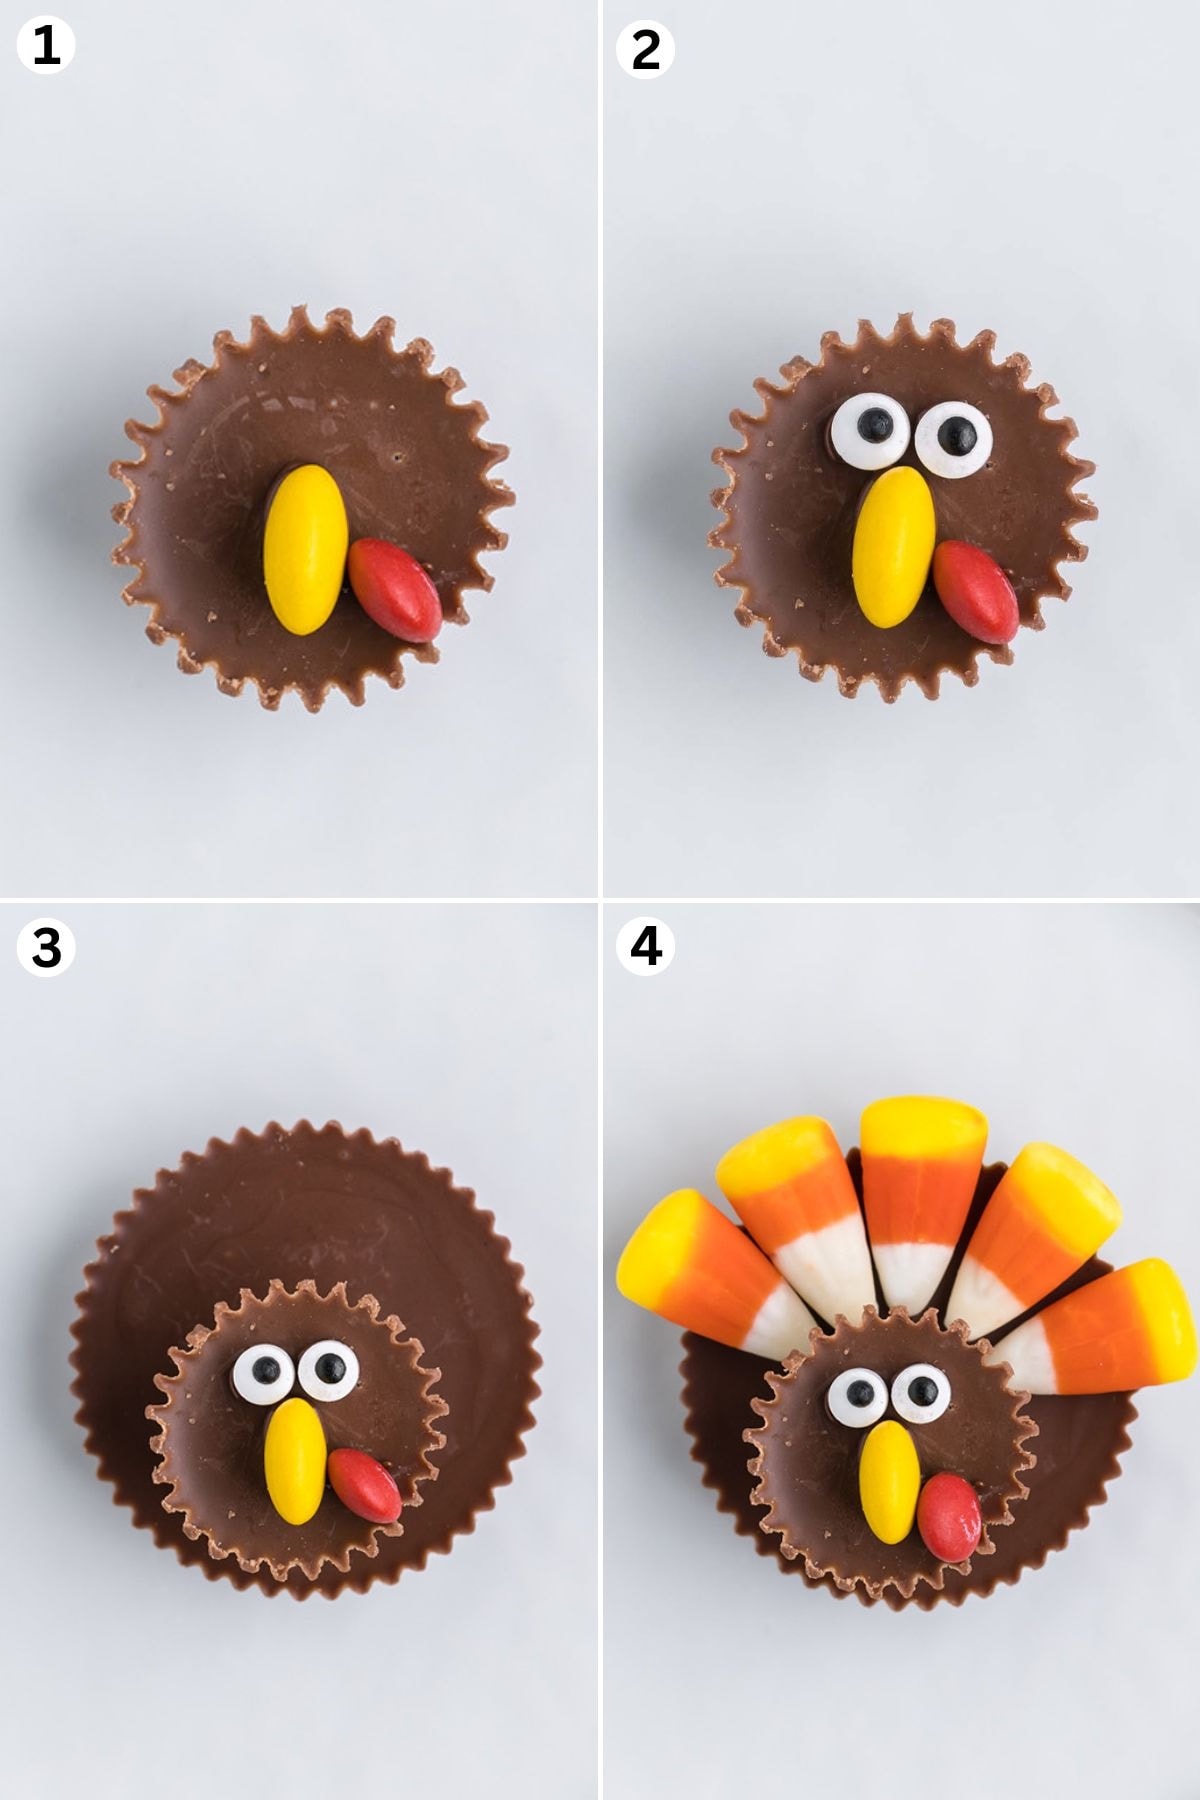 sticking yellow and red m&m's to the peanut butter cup for the beak and wattle. adding the eyes. adding bigger peanut butter cups as the body. add a couple candy corns as the feathers. 